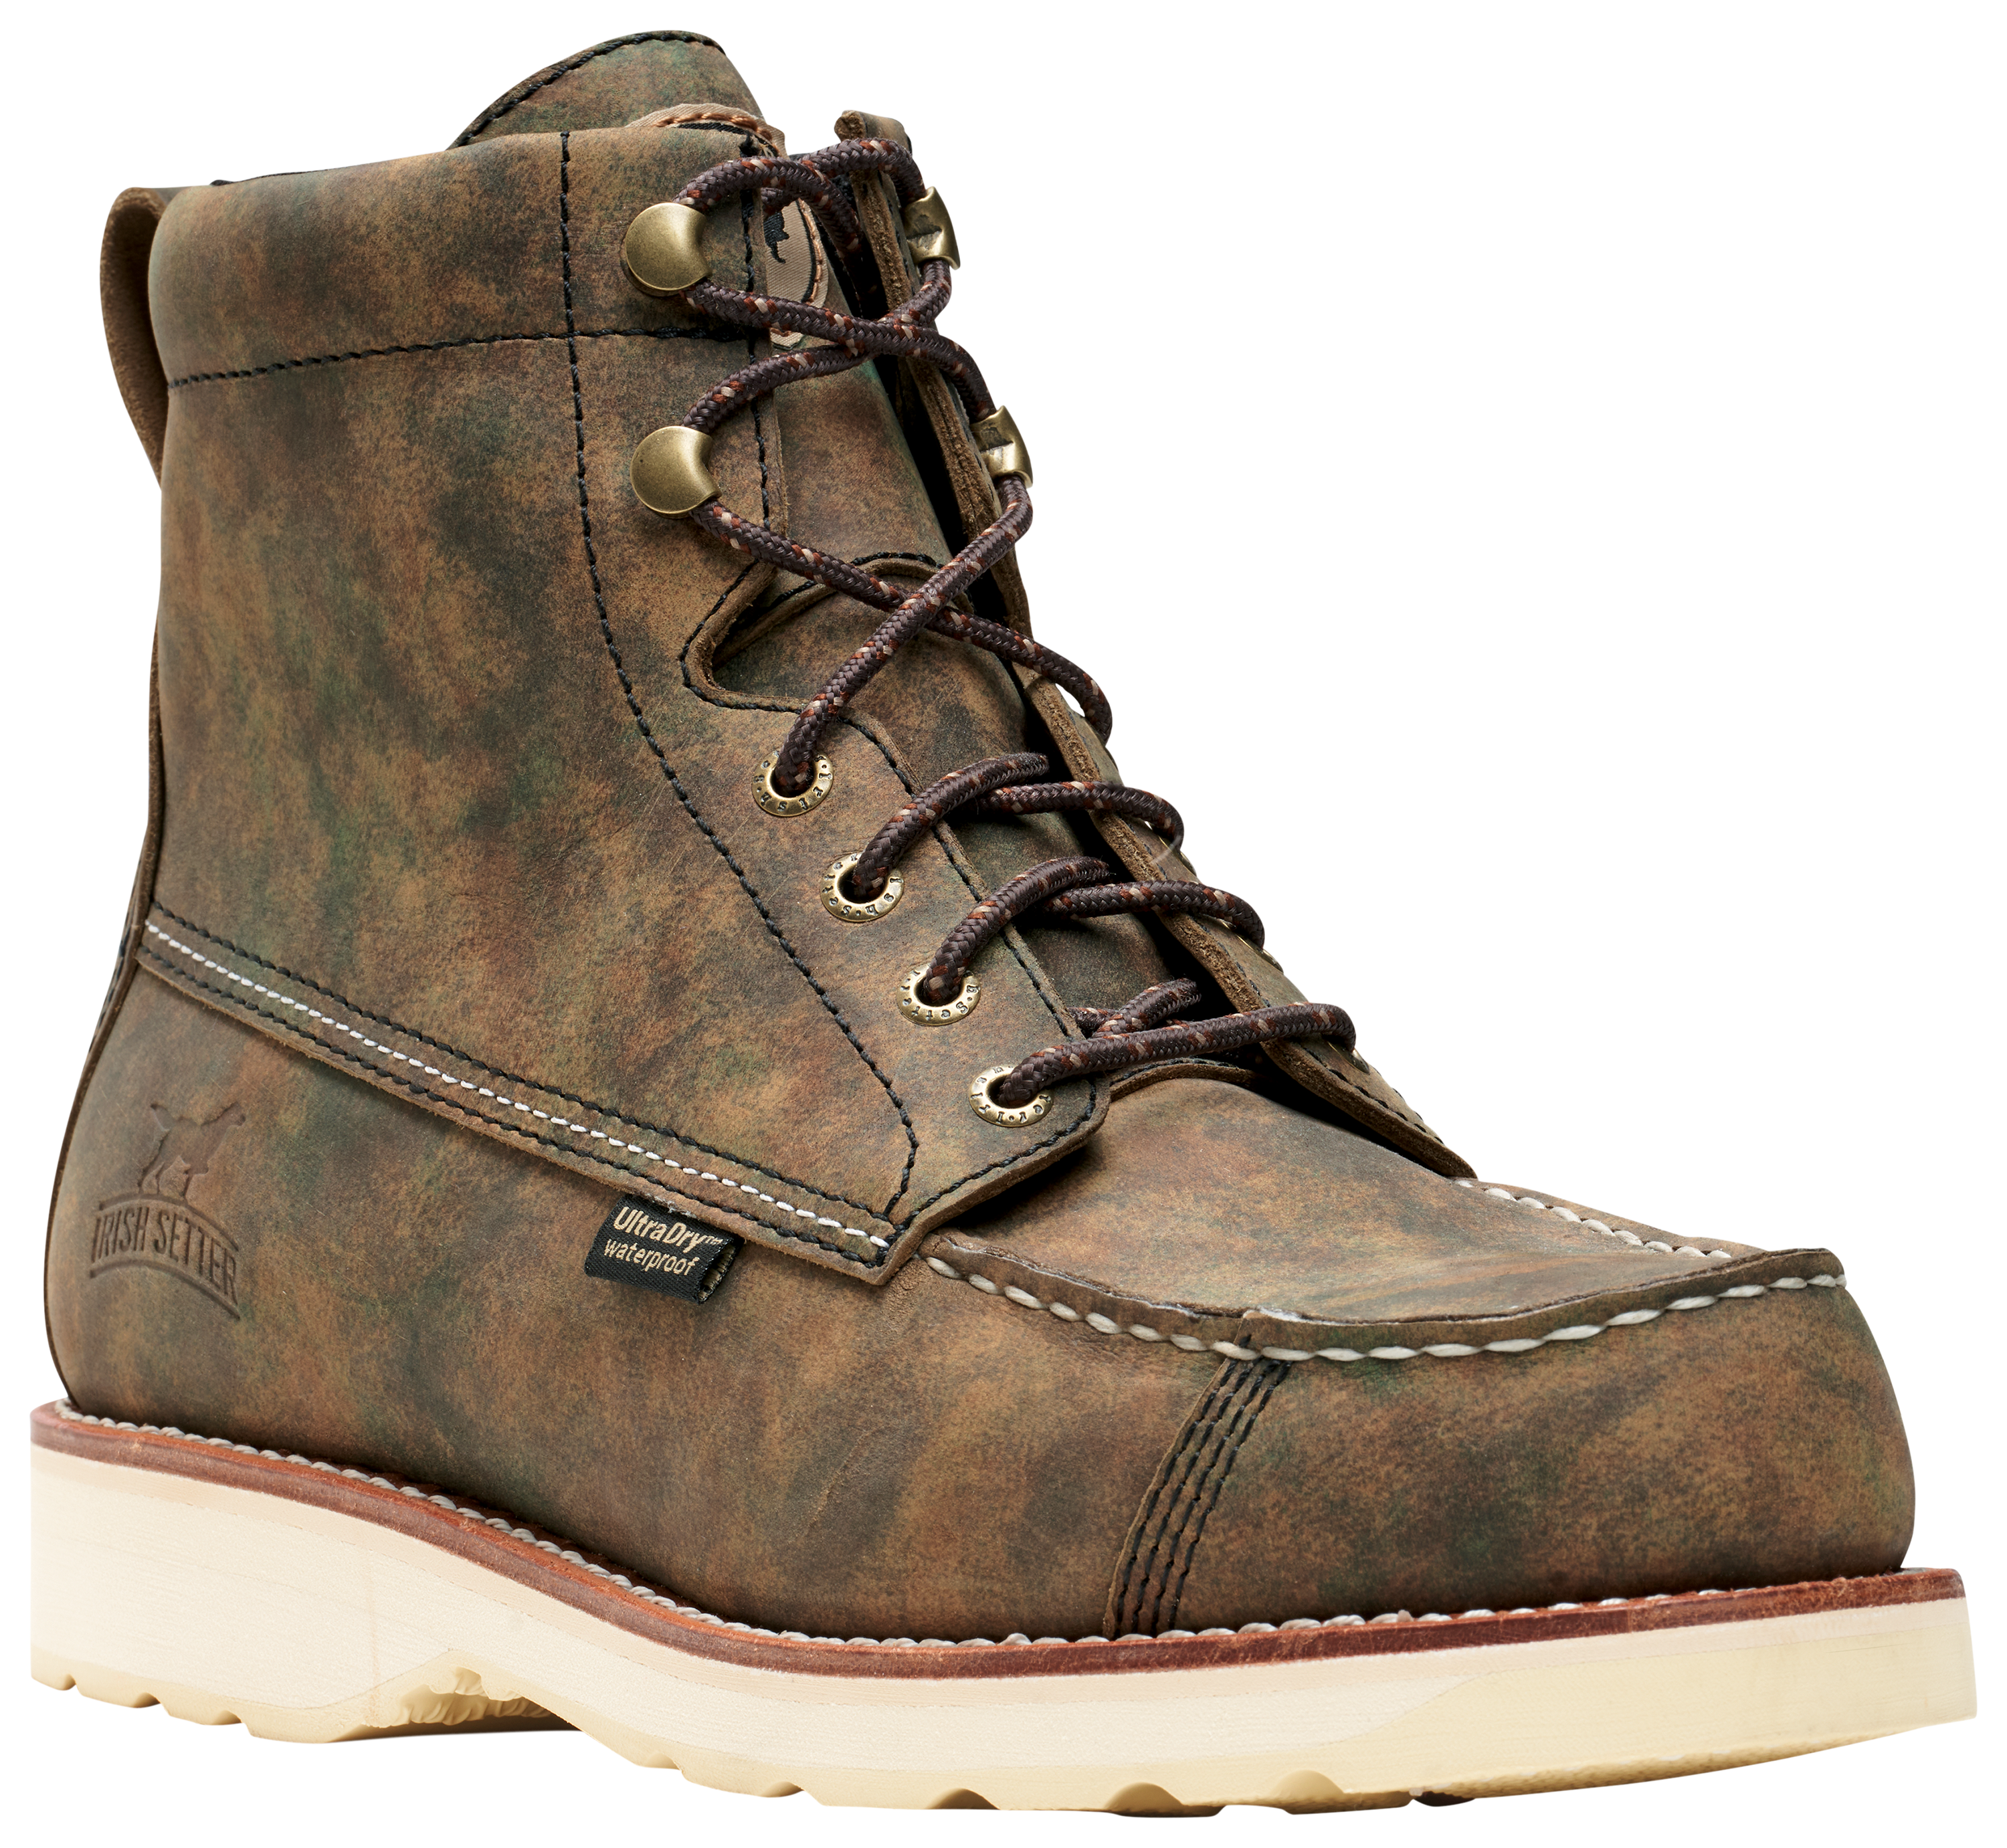 Irish Setter Wingshooter 7 Waterproof Hunting Boots for Men - Earth Camo - 11.5W